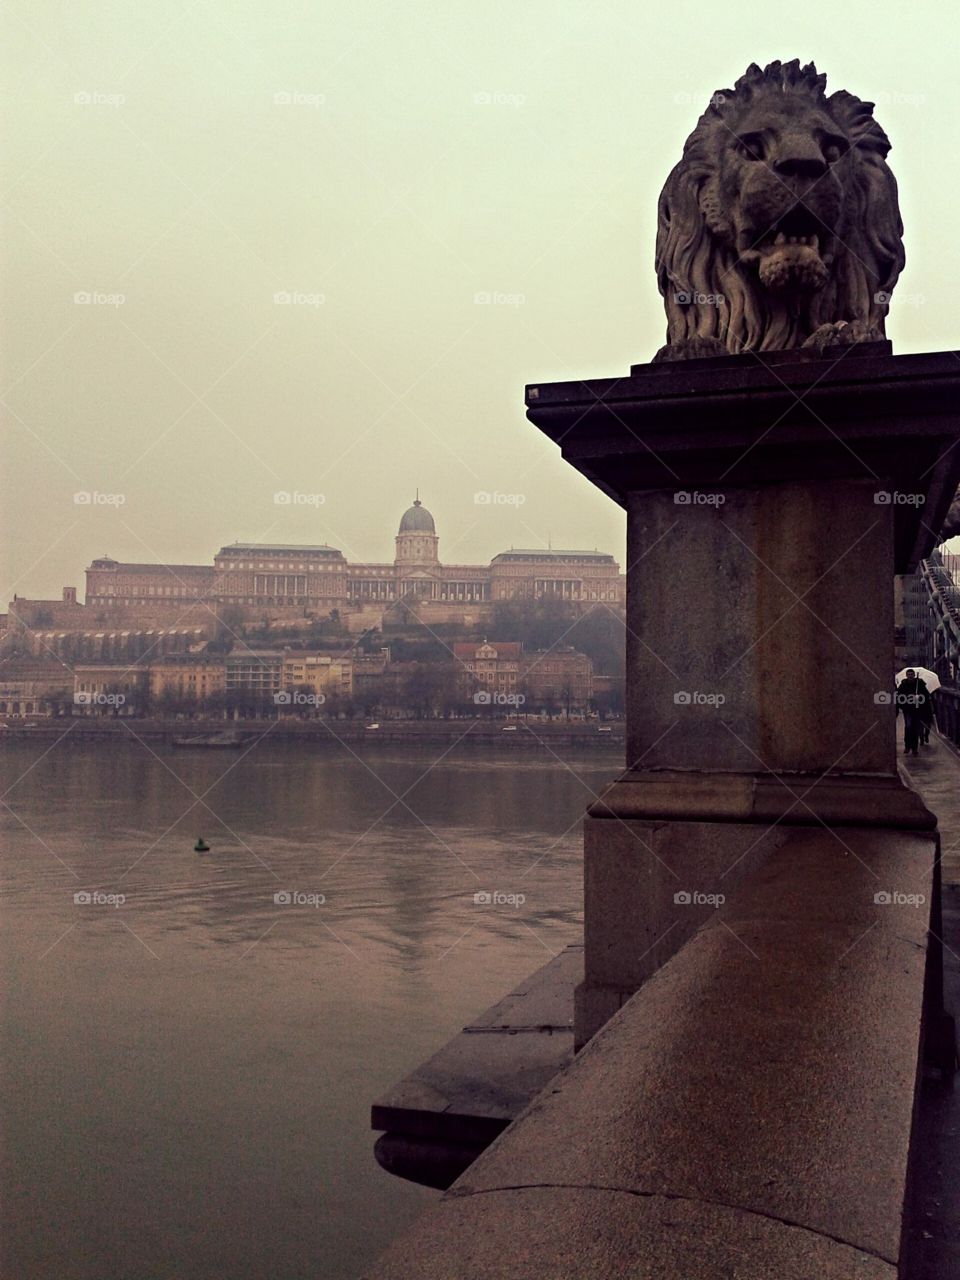 the chain bridge in view, gives a picturesque view of the buda castle